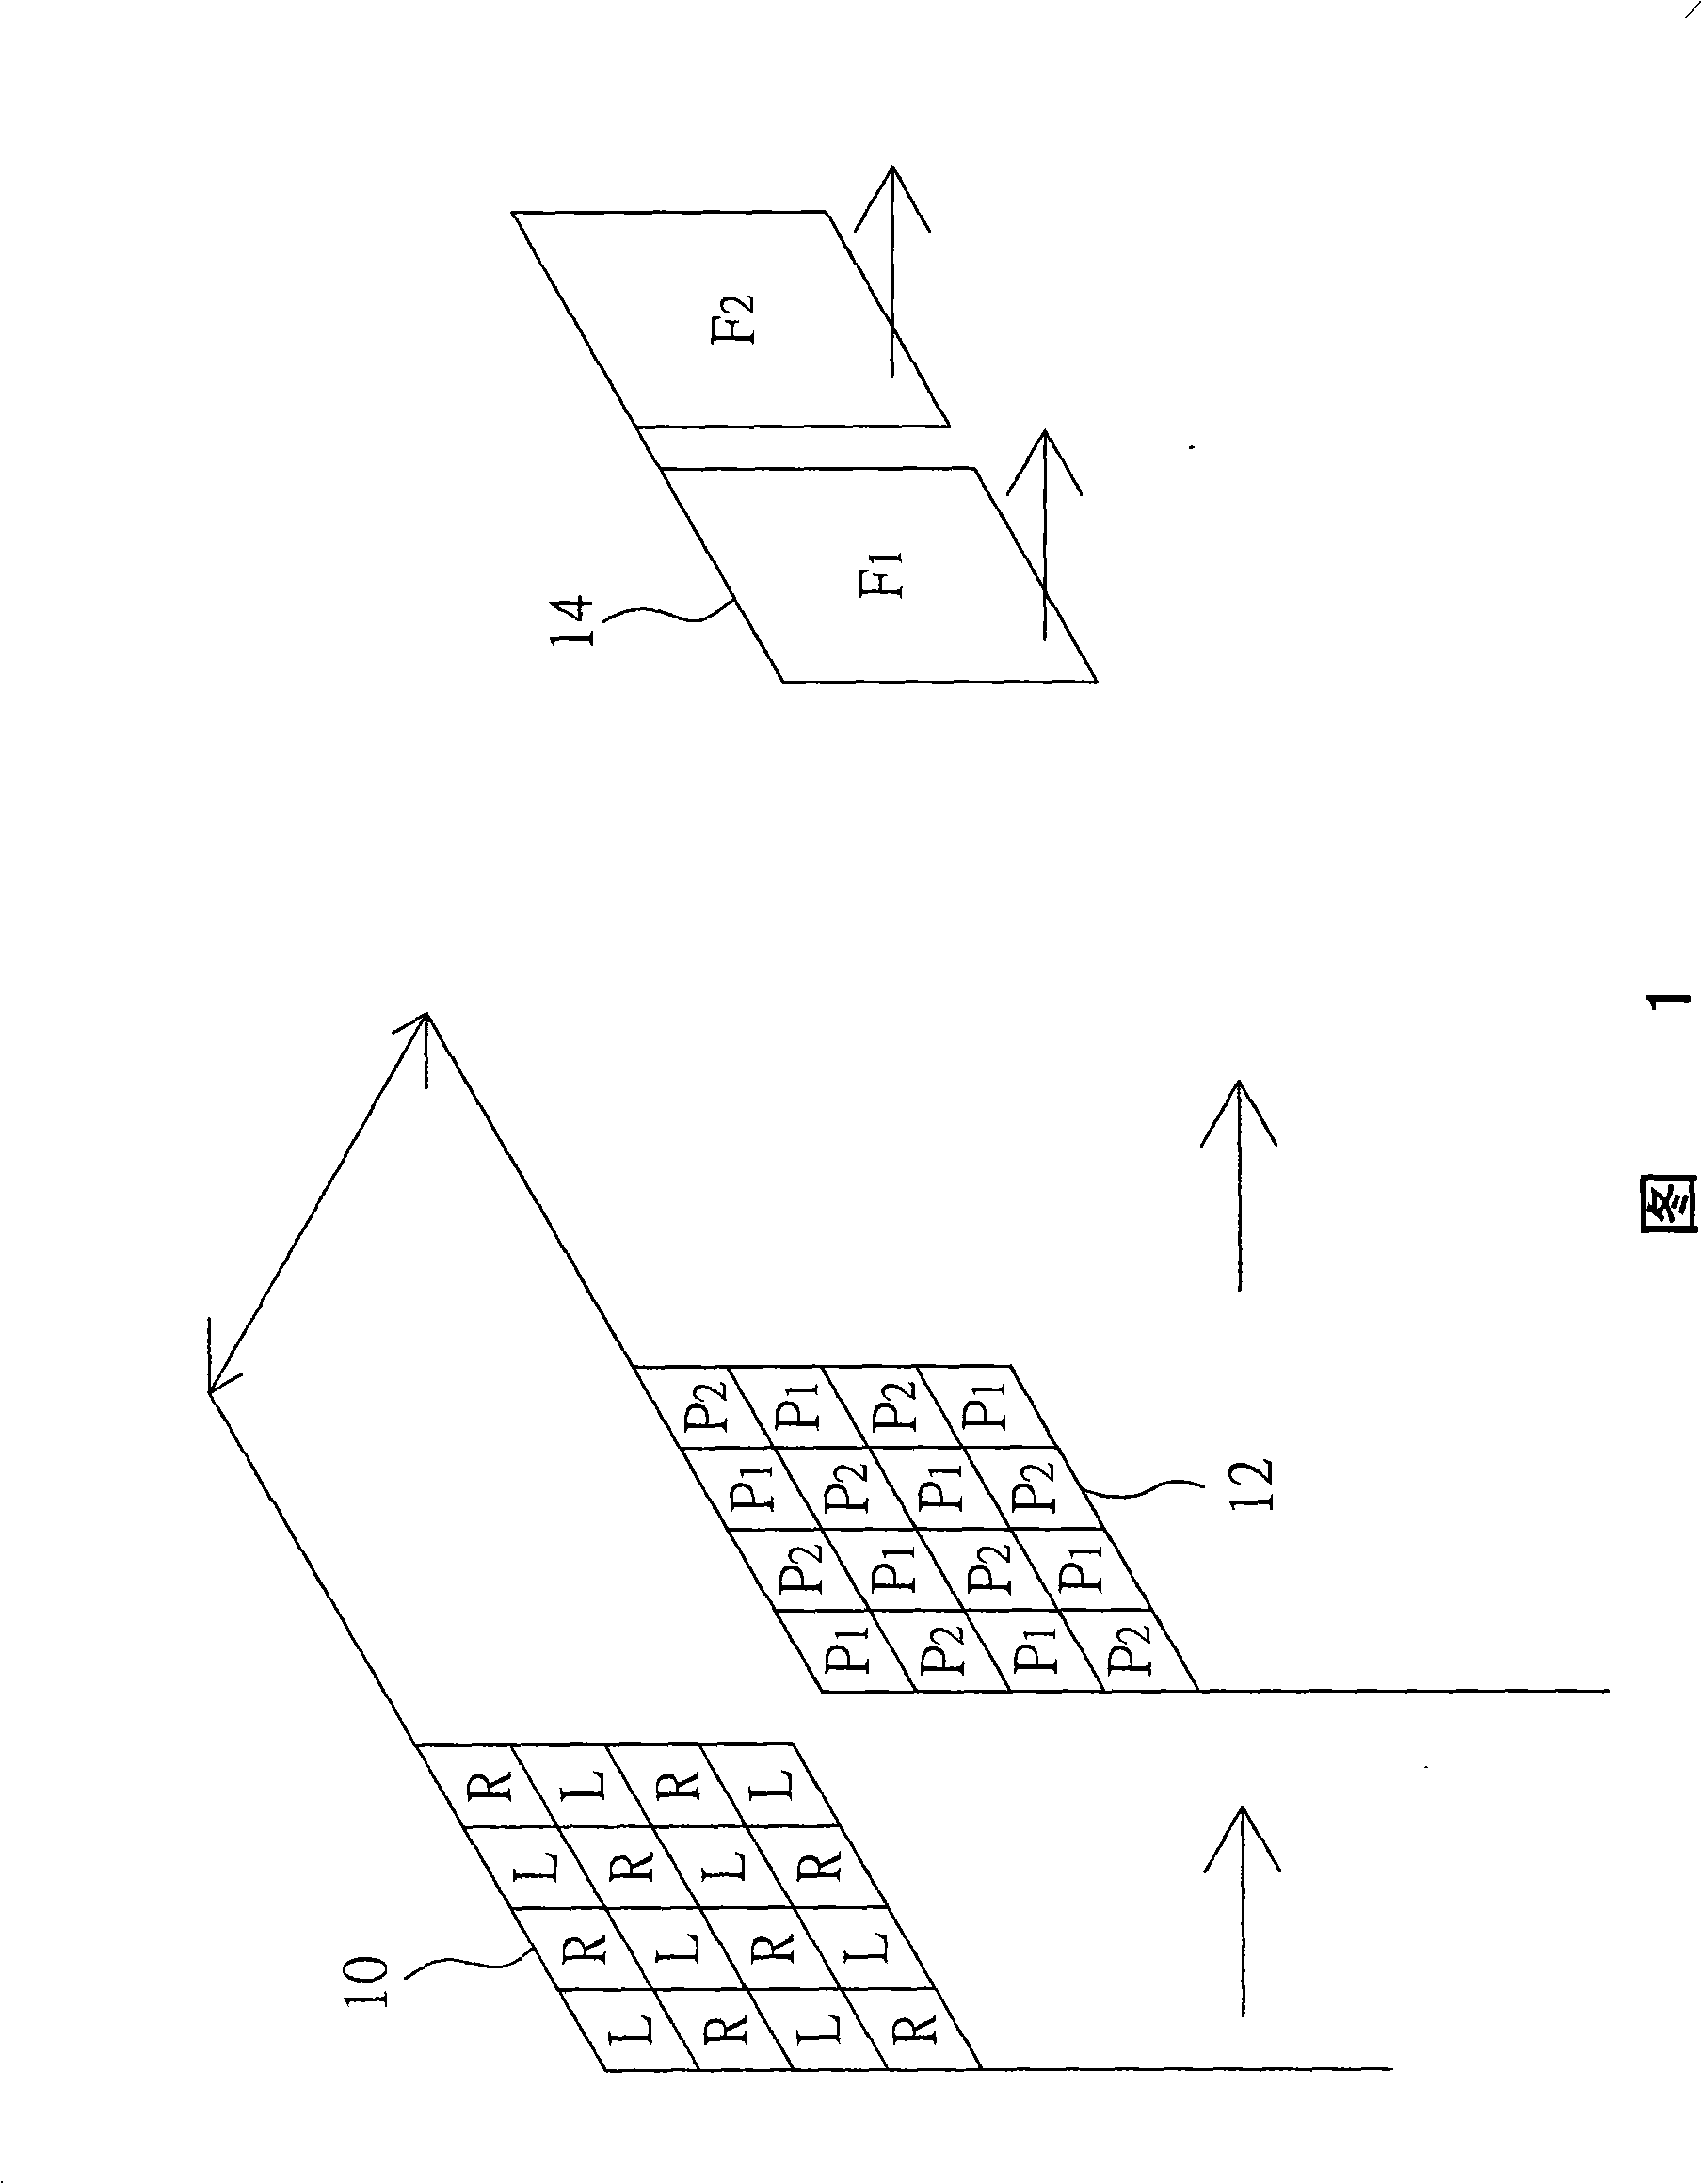 Backlight module group causing display possessing stereo image-forming function and its light guide board